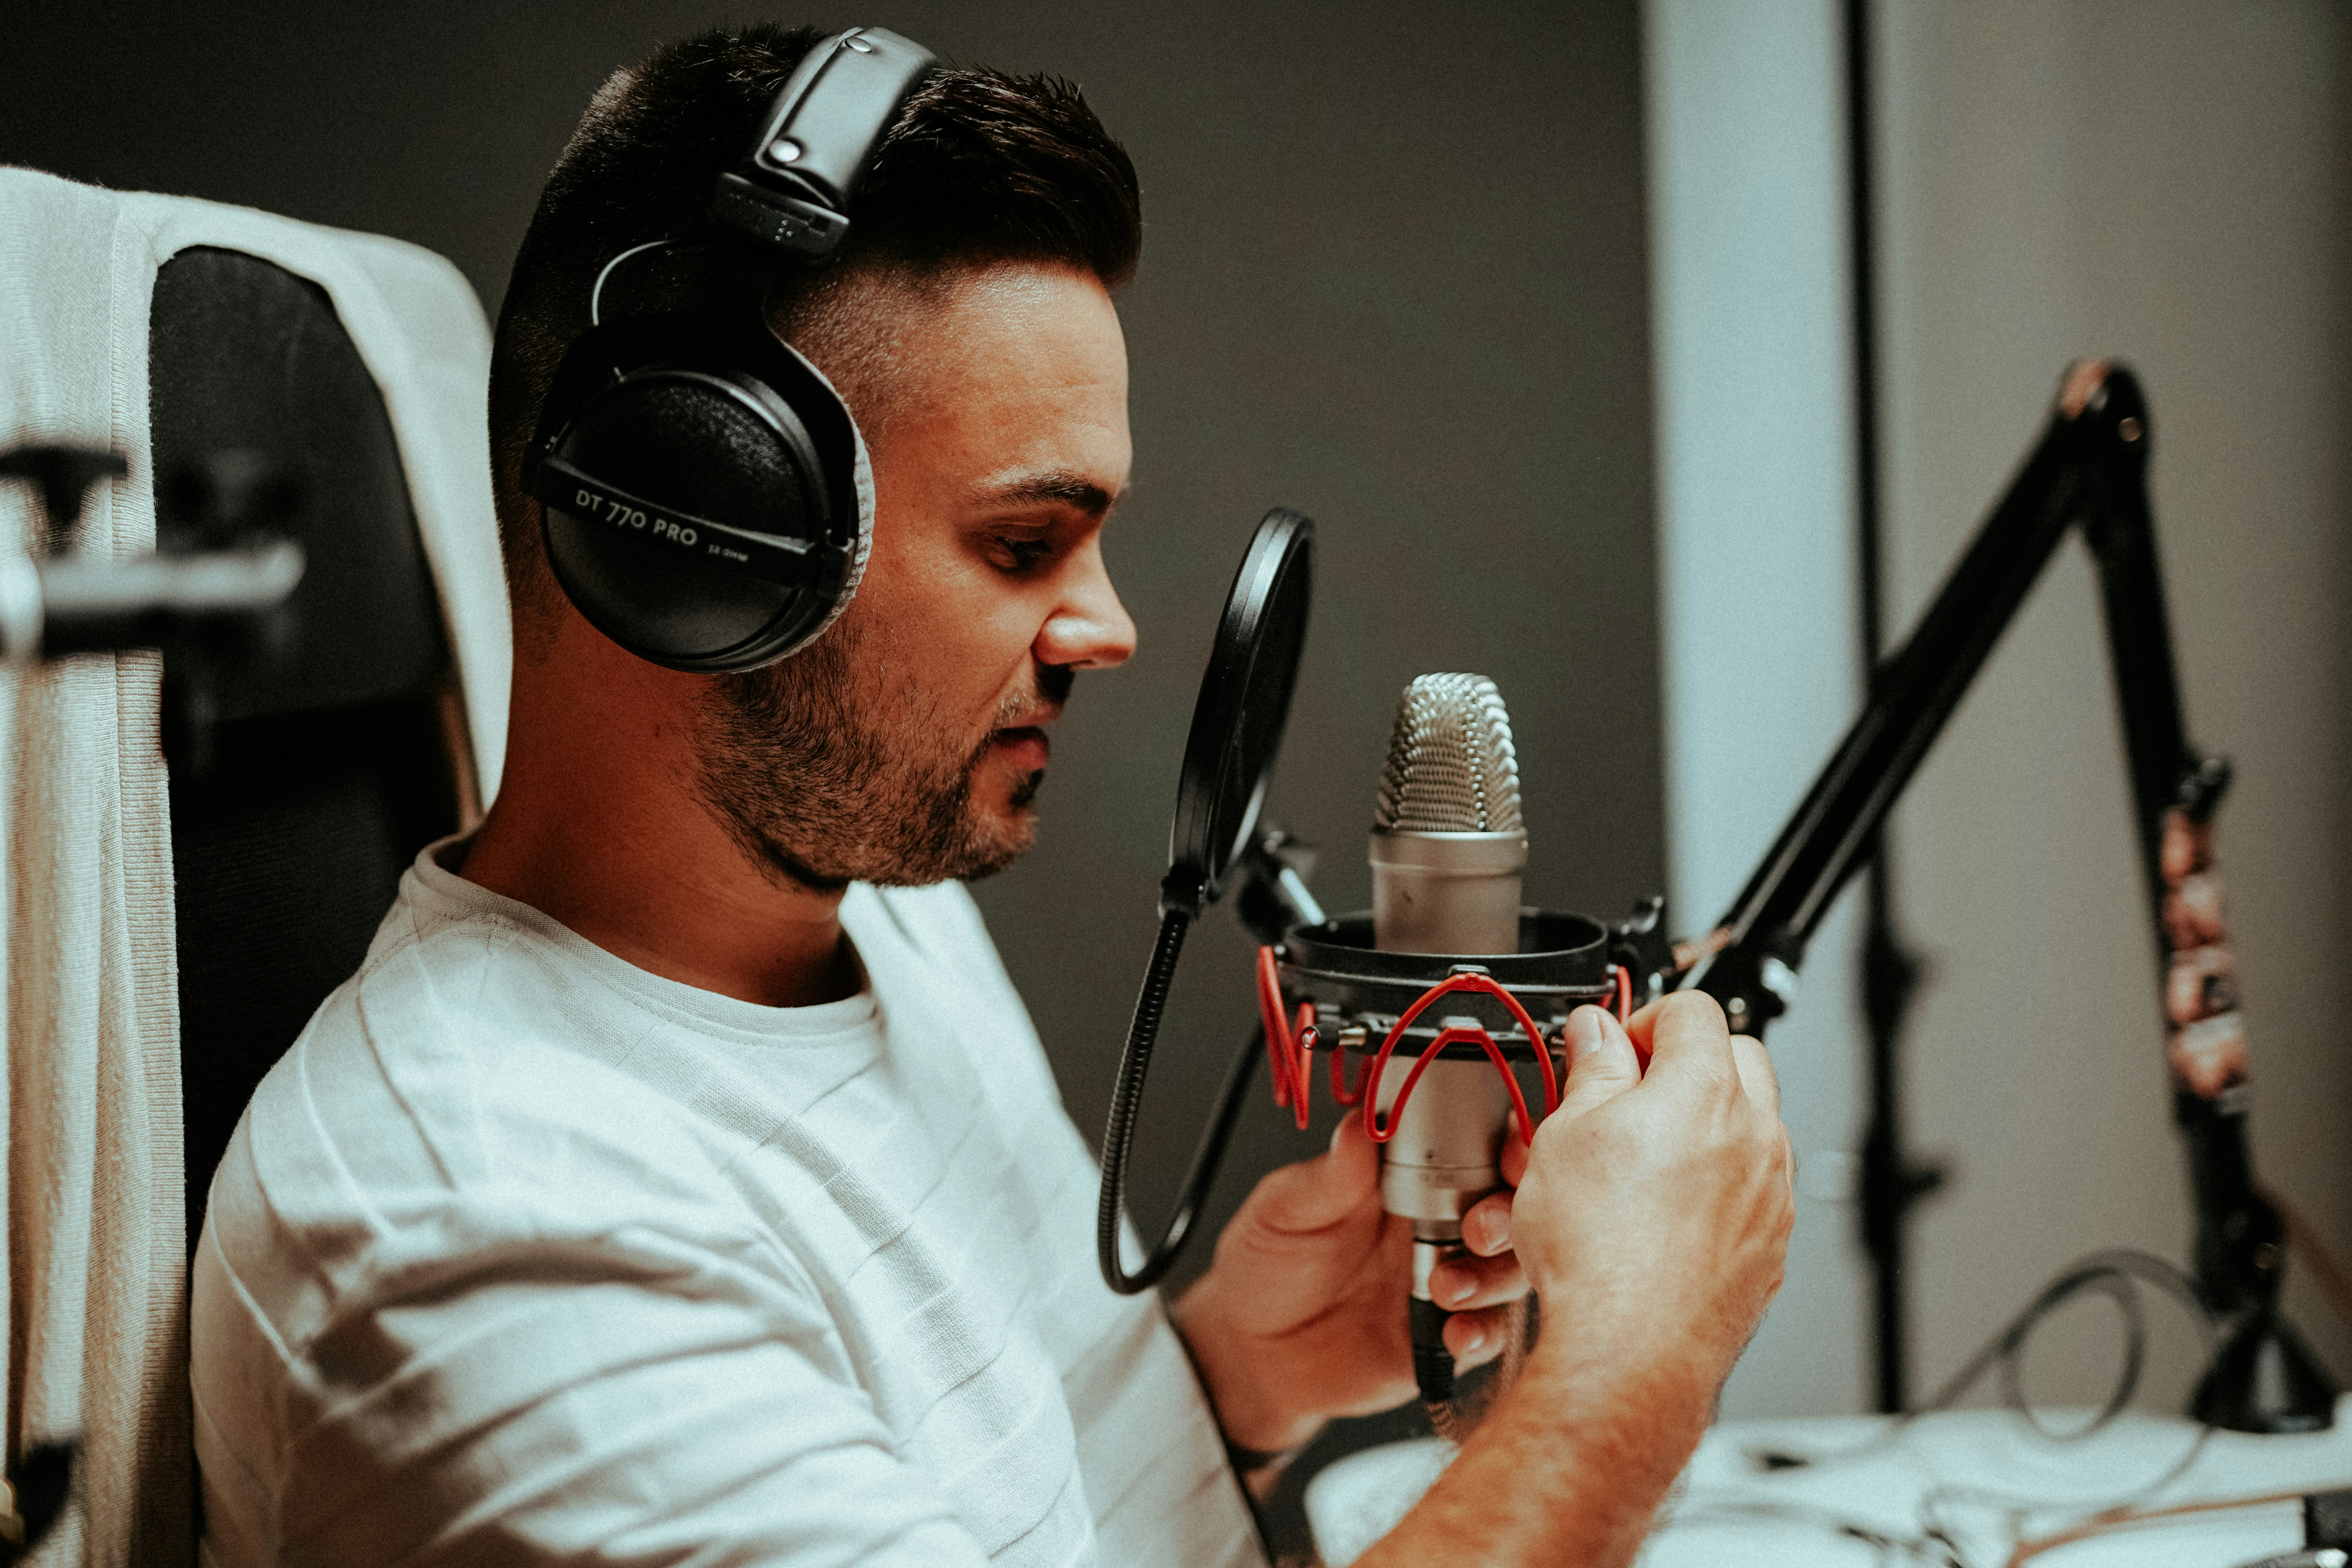 Malte Helmhold, a content marketer preparing to create content in front of a professional podcaster microphone